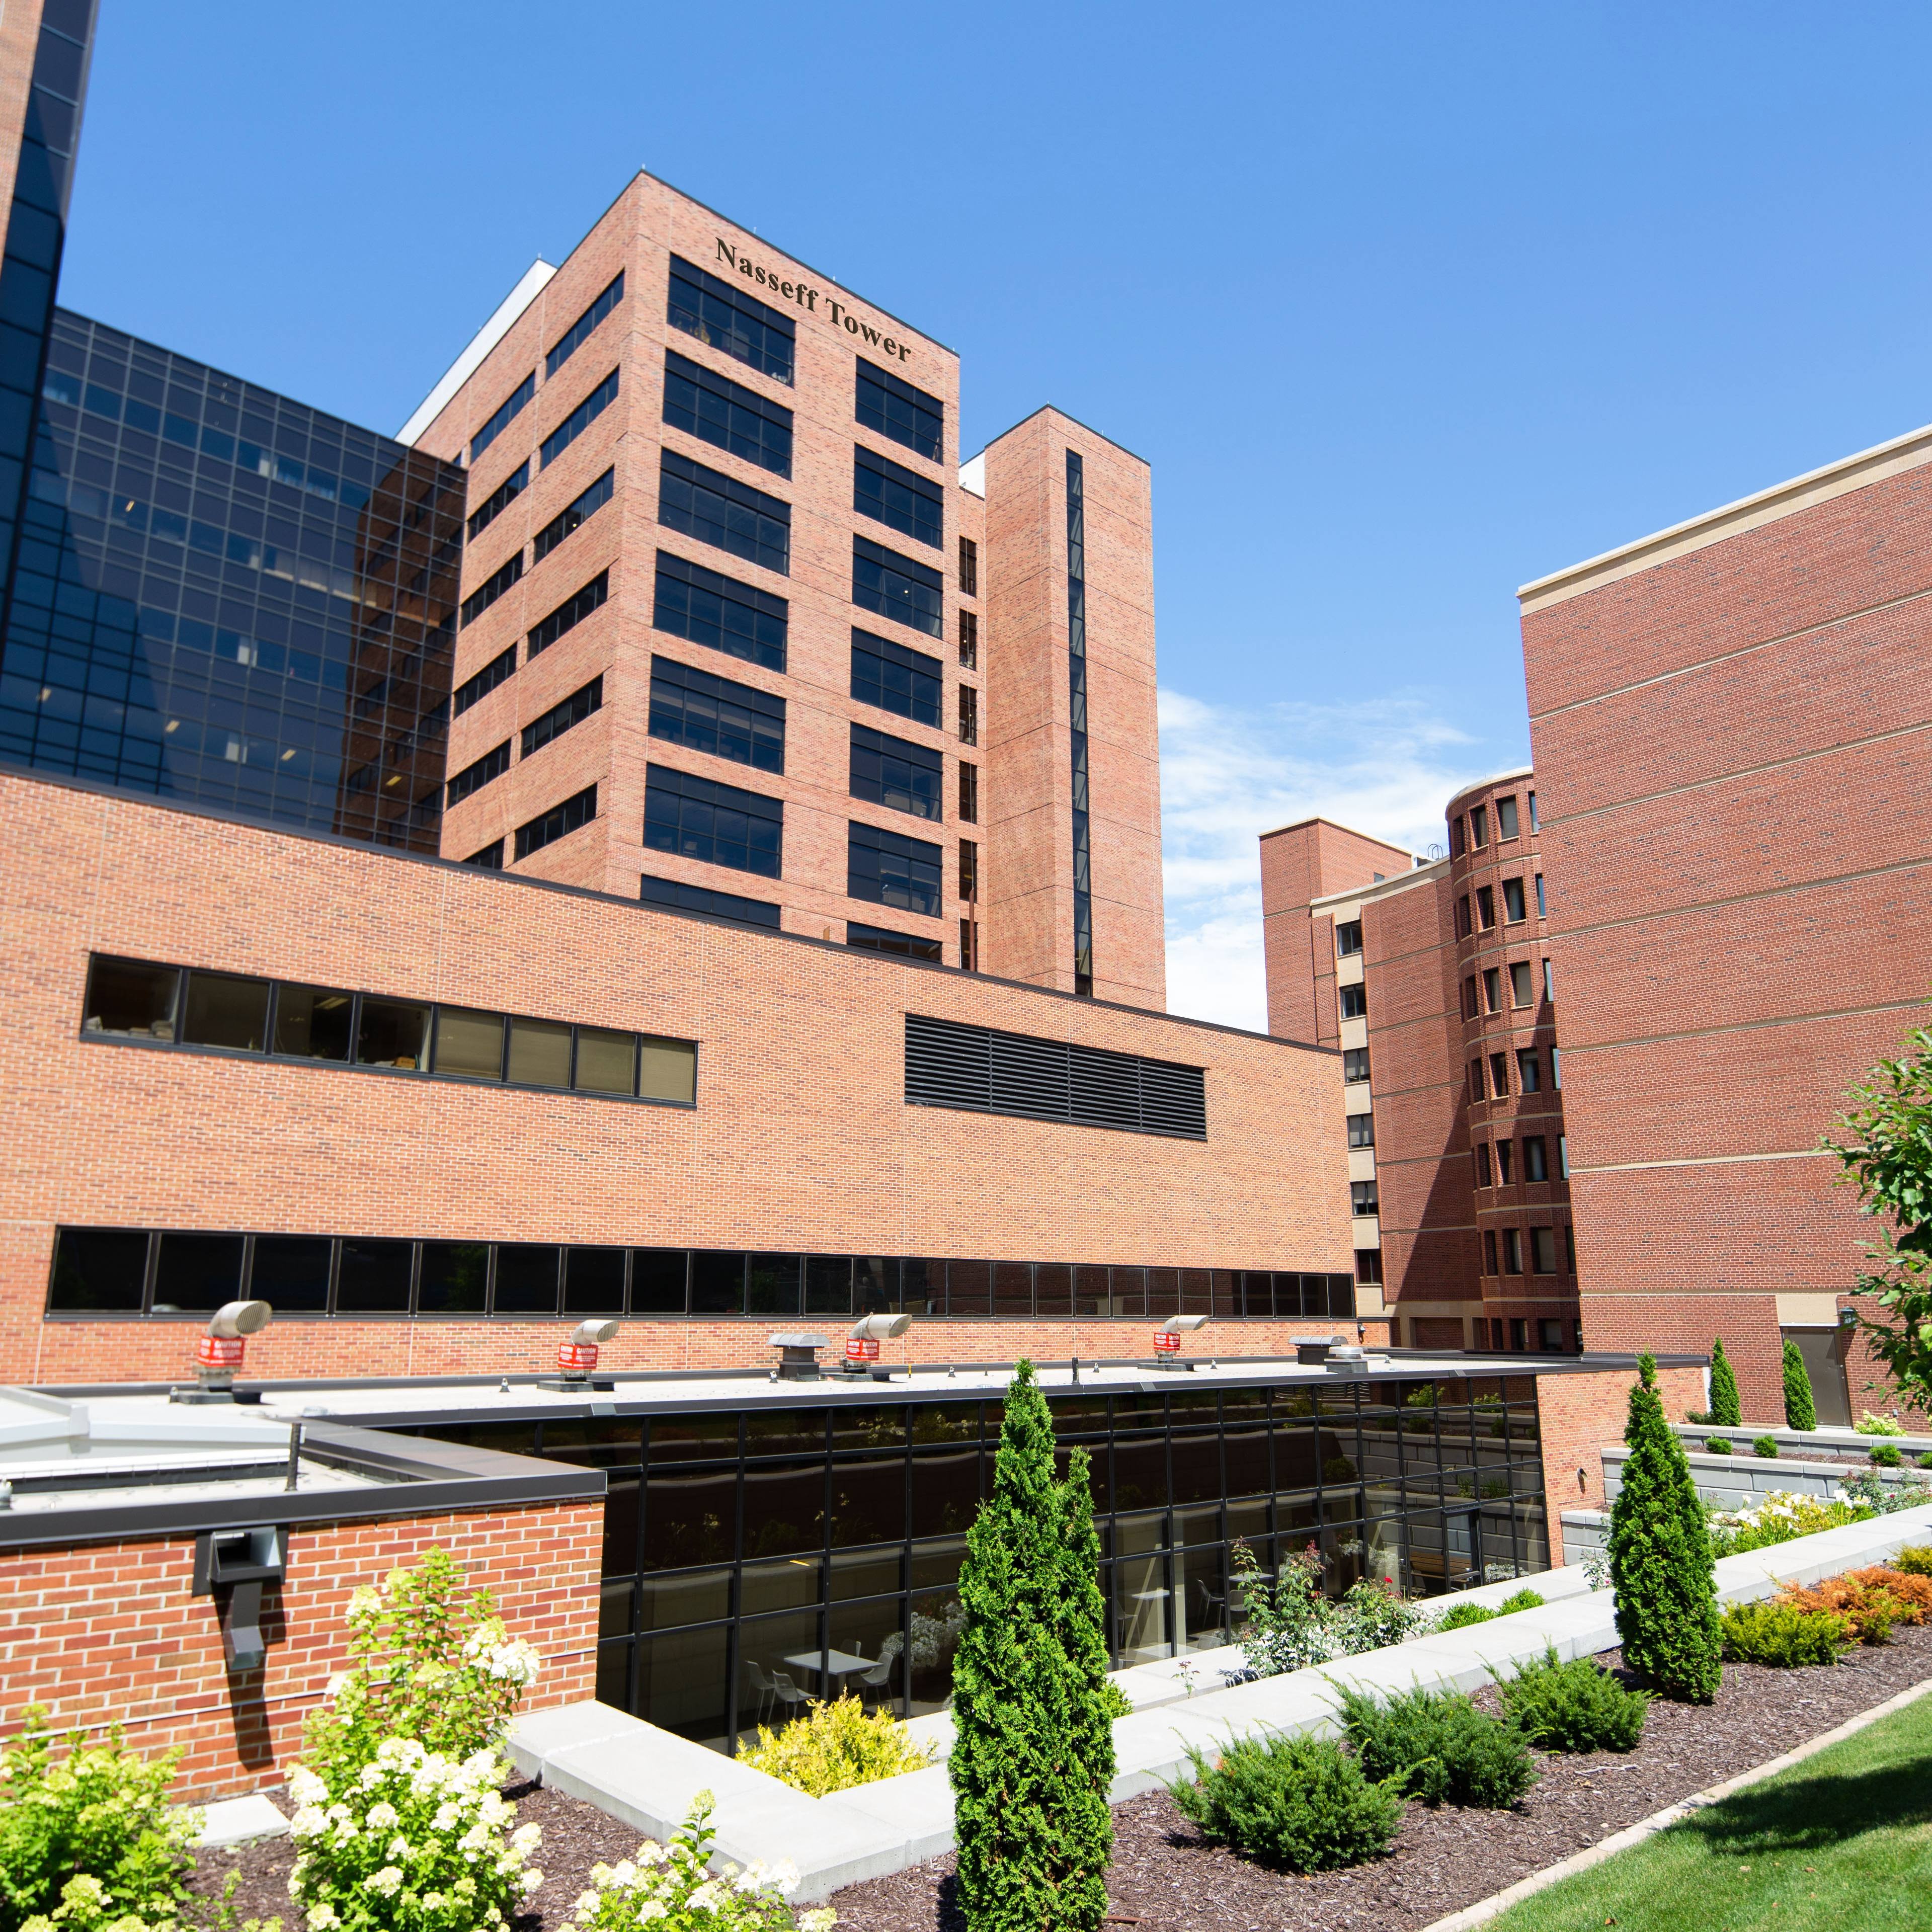 $60 million gift to Mayo Clinic will accelerate efforts to transform health  care delivery in Minnesota - Mayo Clinic News Network